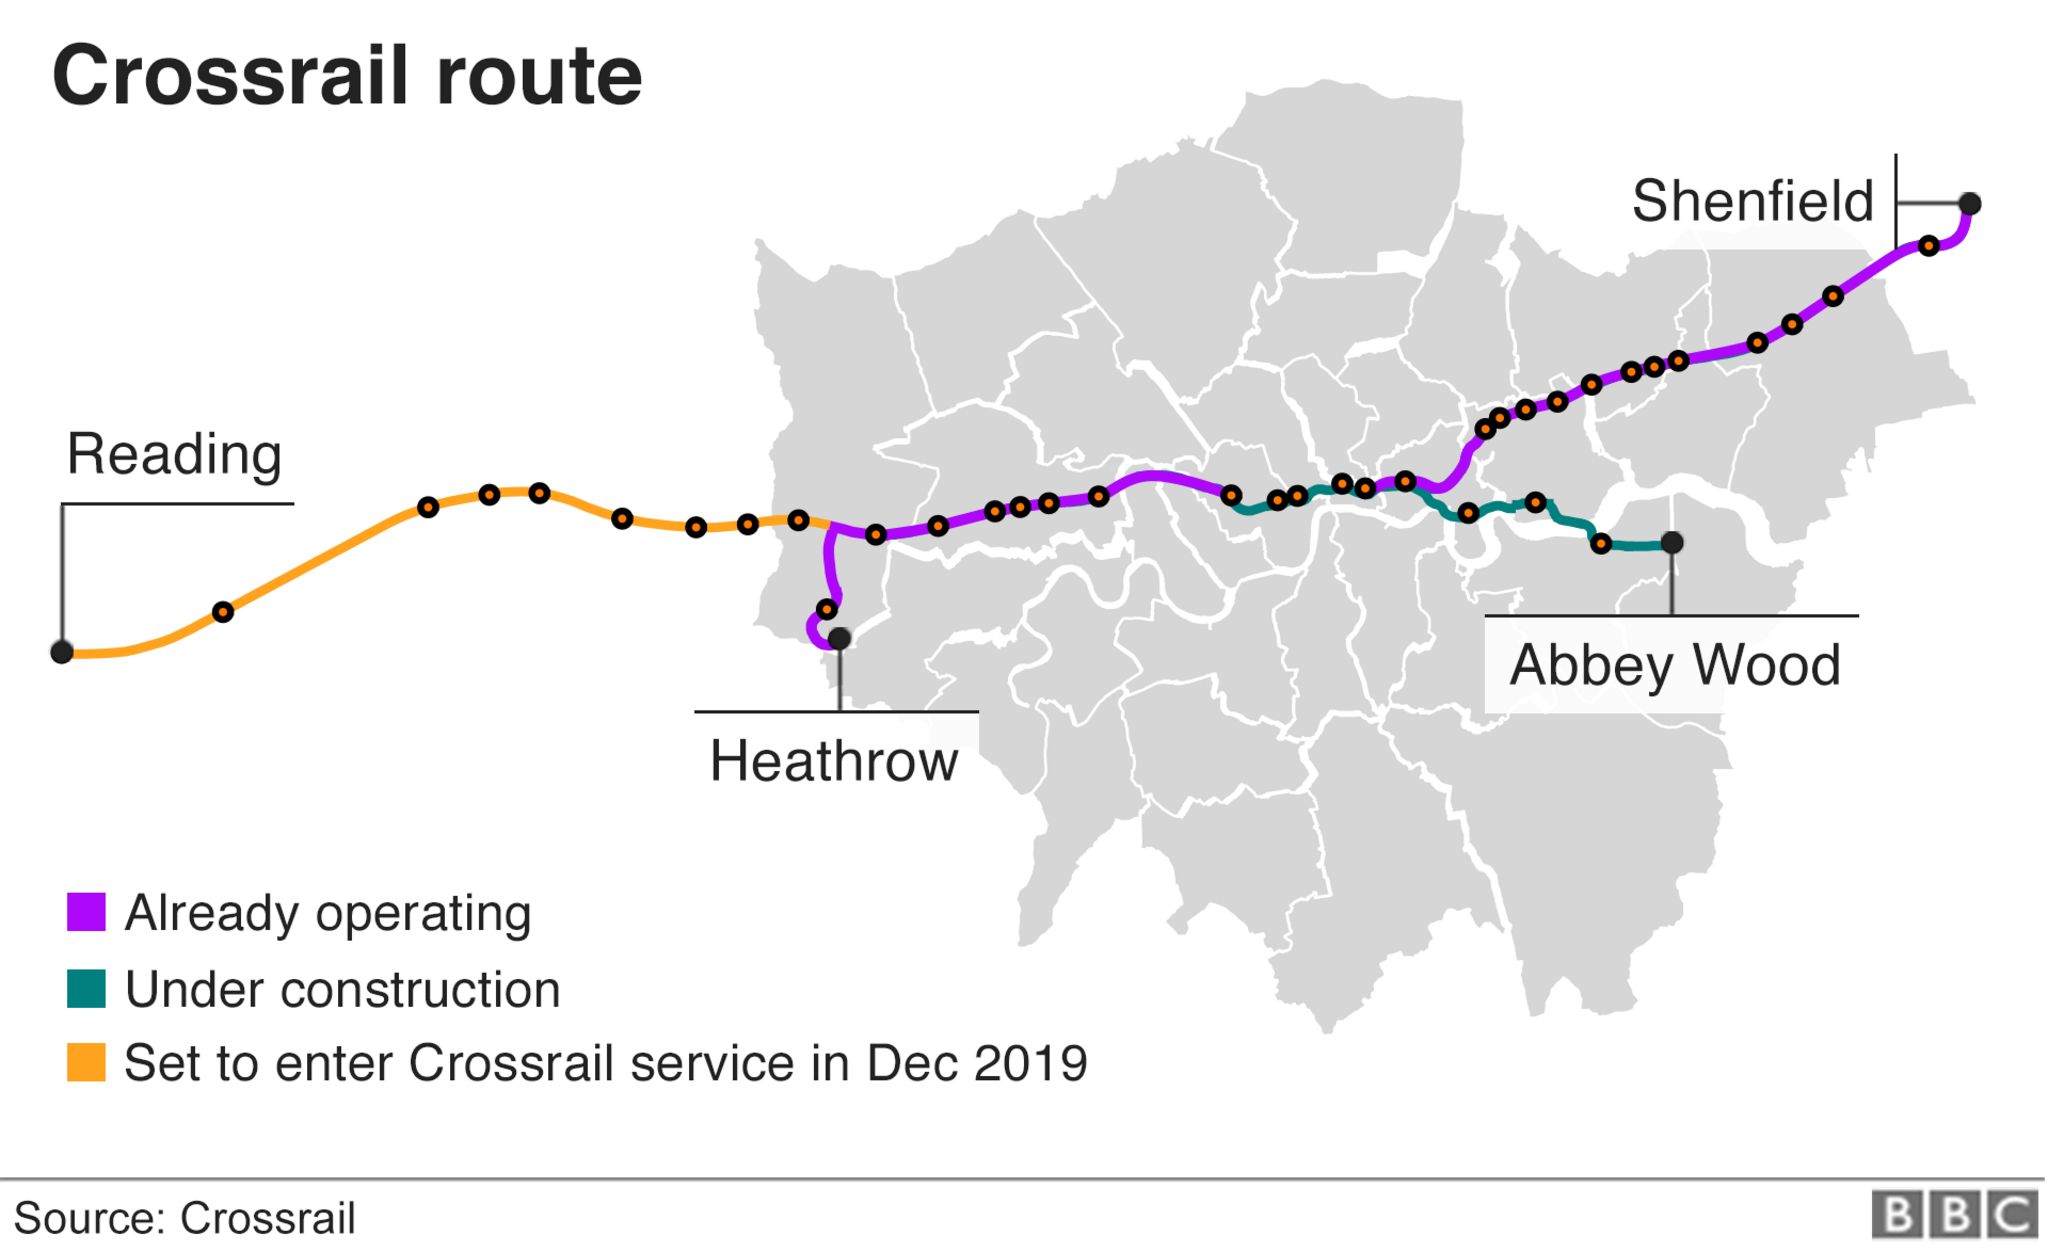 Map showing the Crossrail route